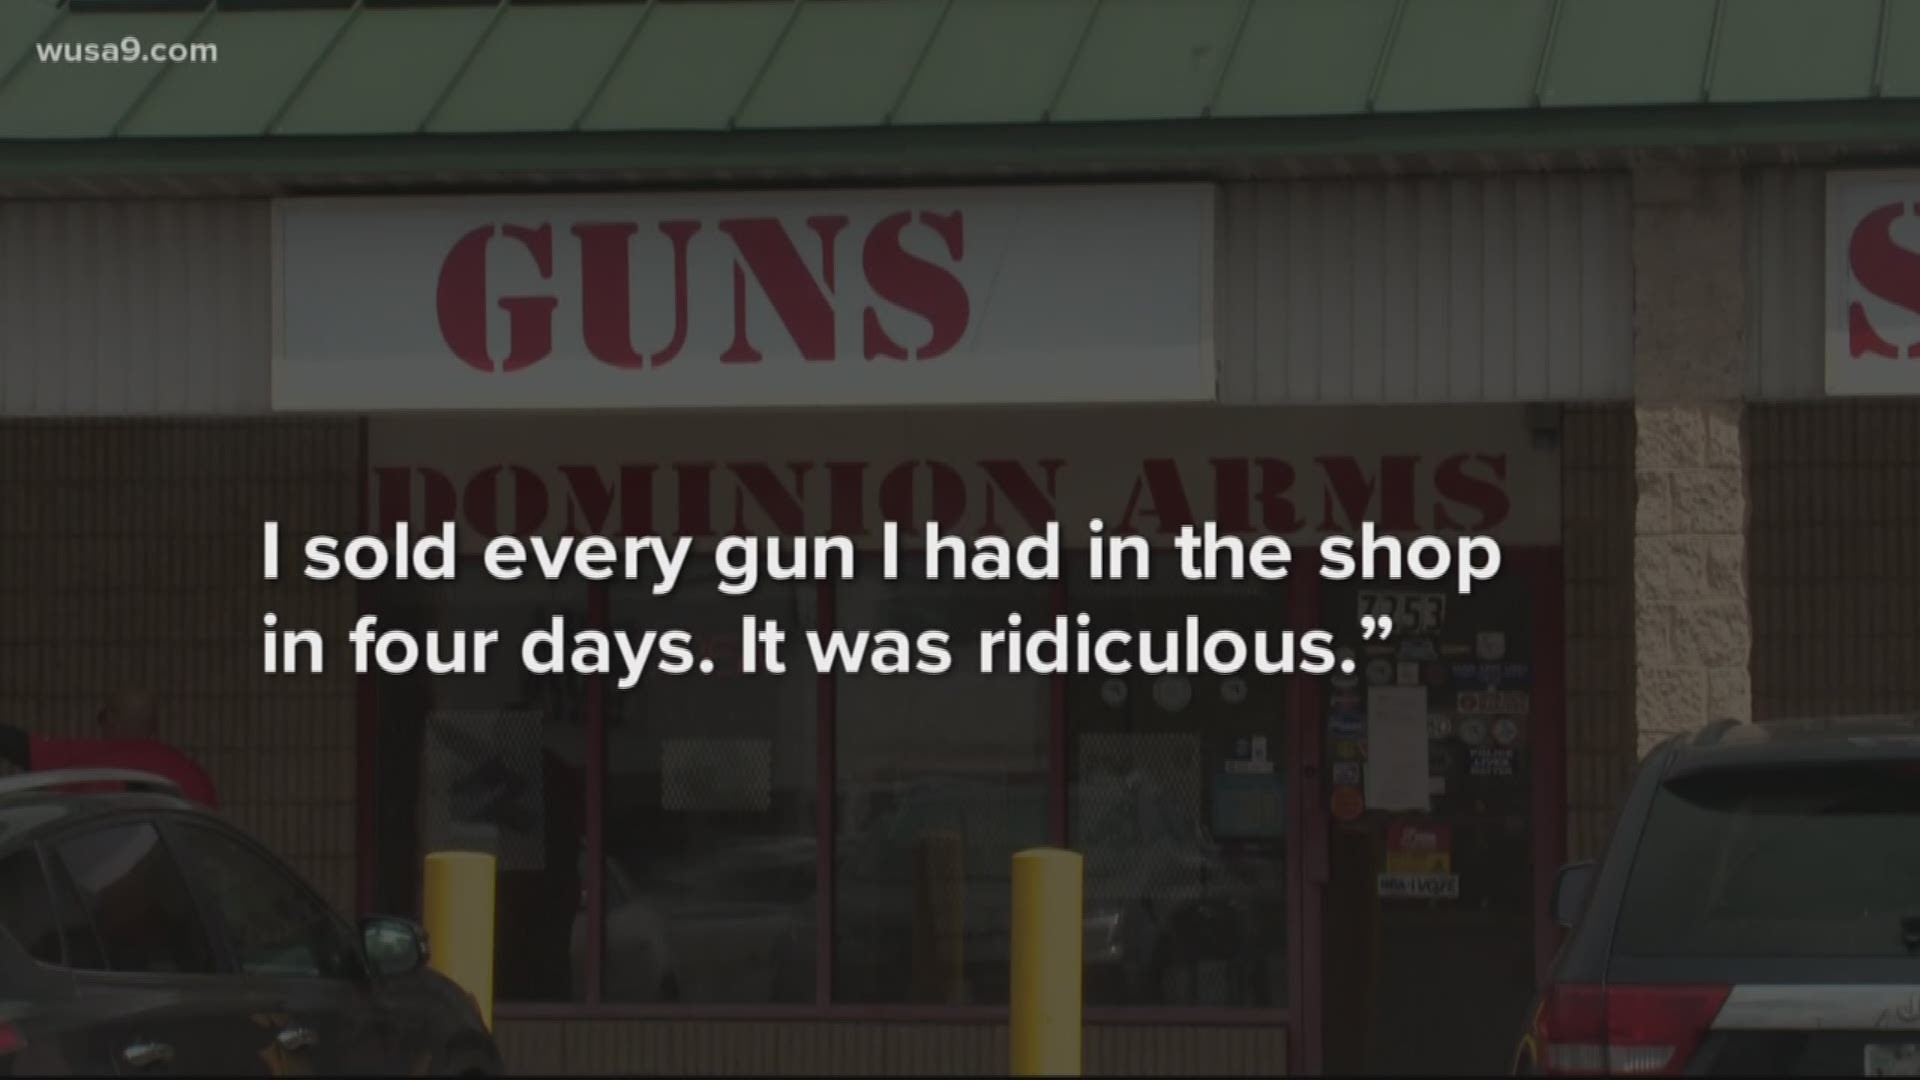 The owner of Dominion Arms said he sold out of his 100+ gun stock in four days in March.